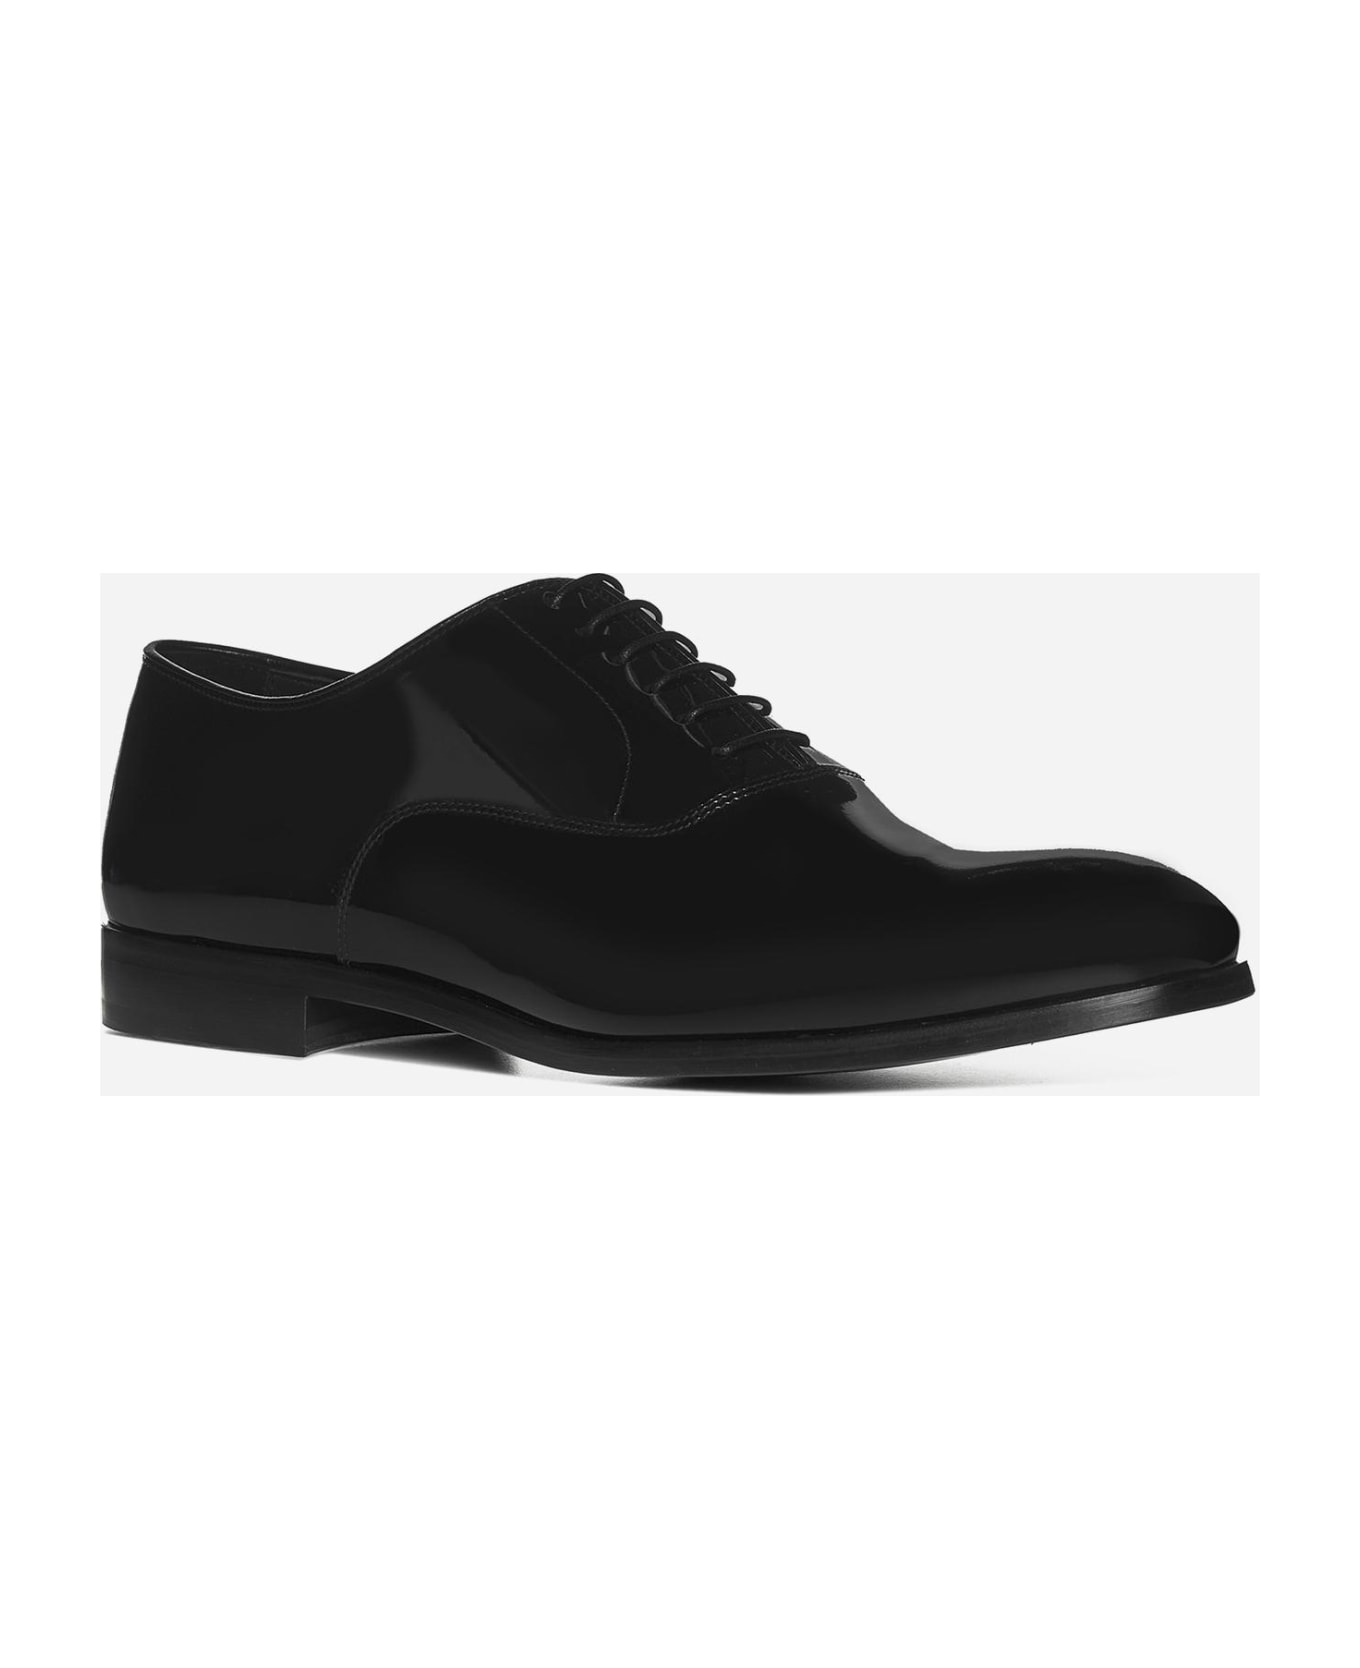 Doucal's Patent Leather Oxford Shoes - BLACK ローファー＆デッキシューズ